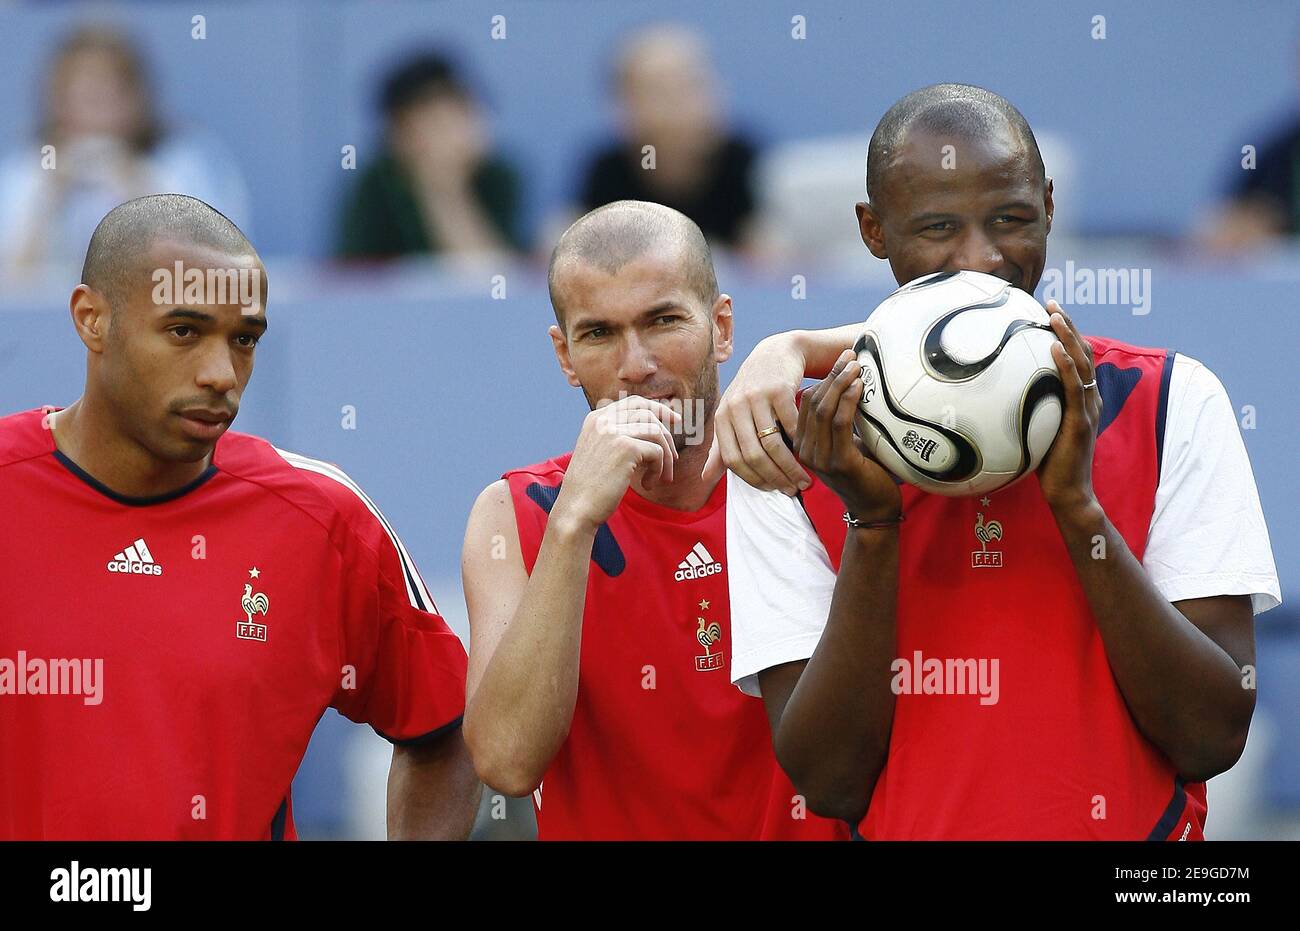 Thierry Henry, Zinedine Zidane in 2006 World Cup Team of the Tournament